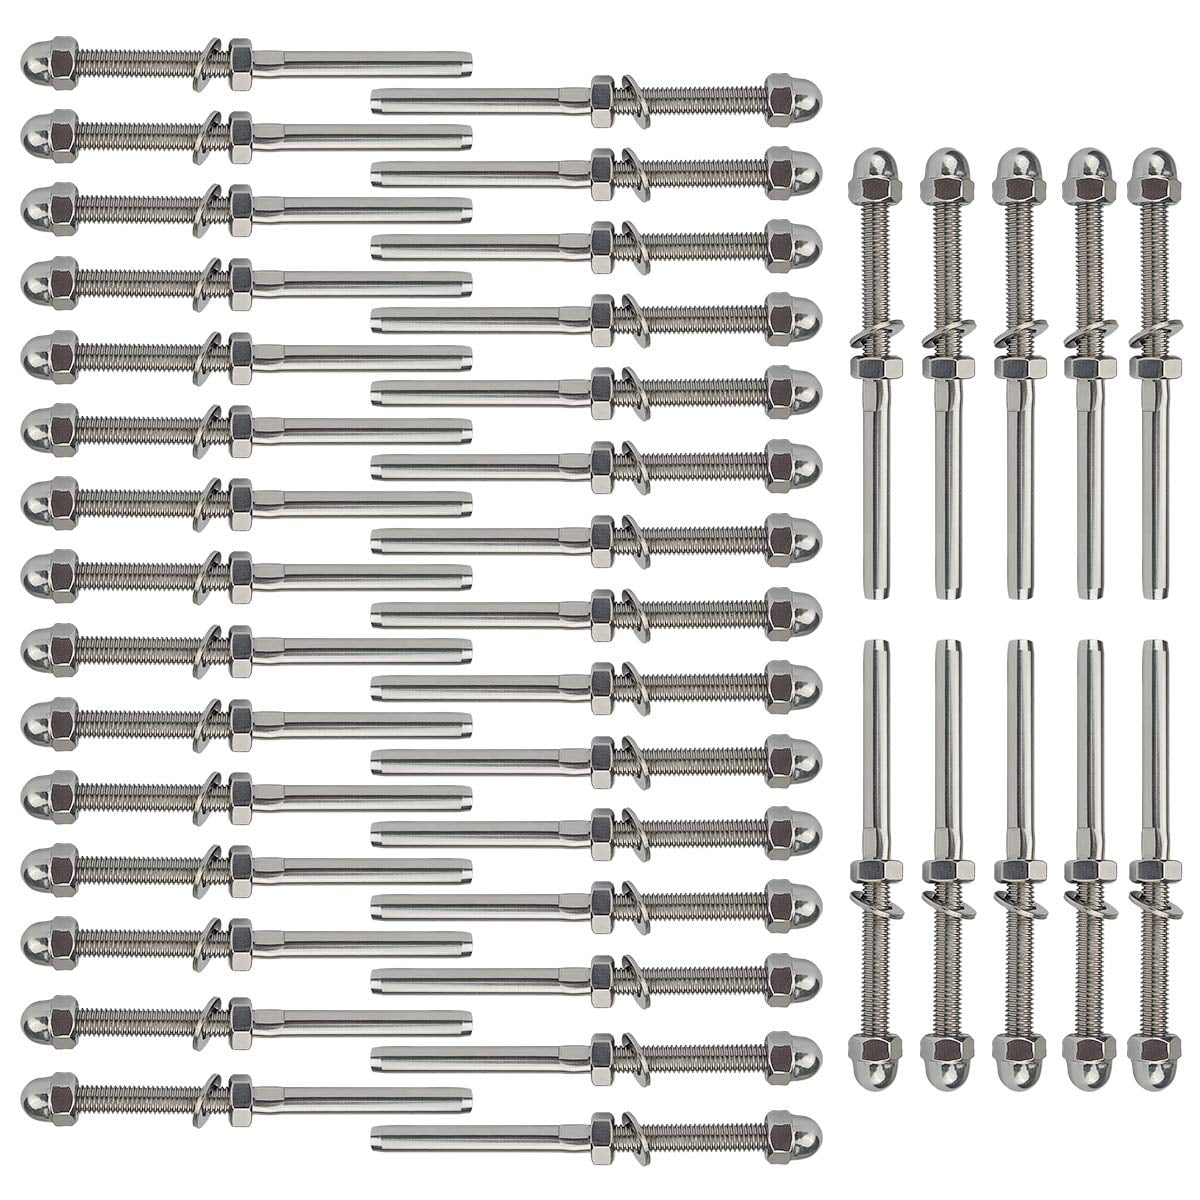 DIY Stud & Stud Cable Railing Kit for 1/8" Cable Stainless Steel T316 25ft 